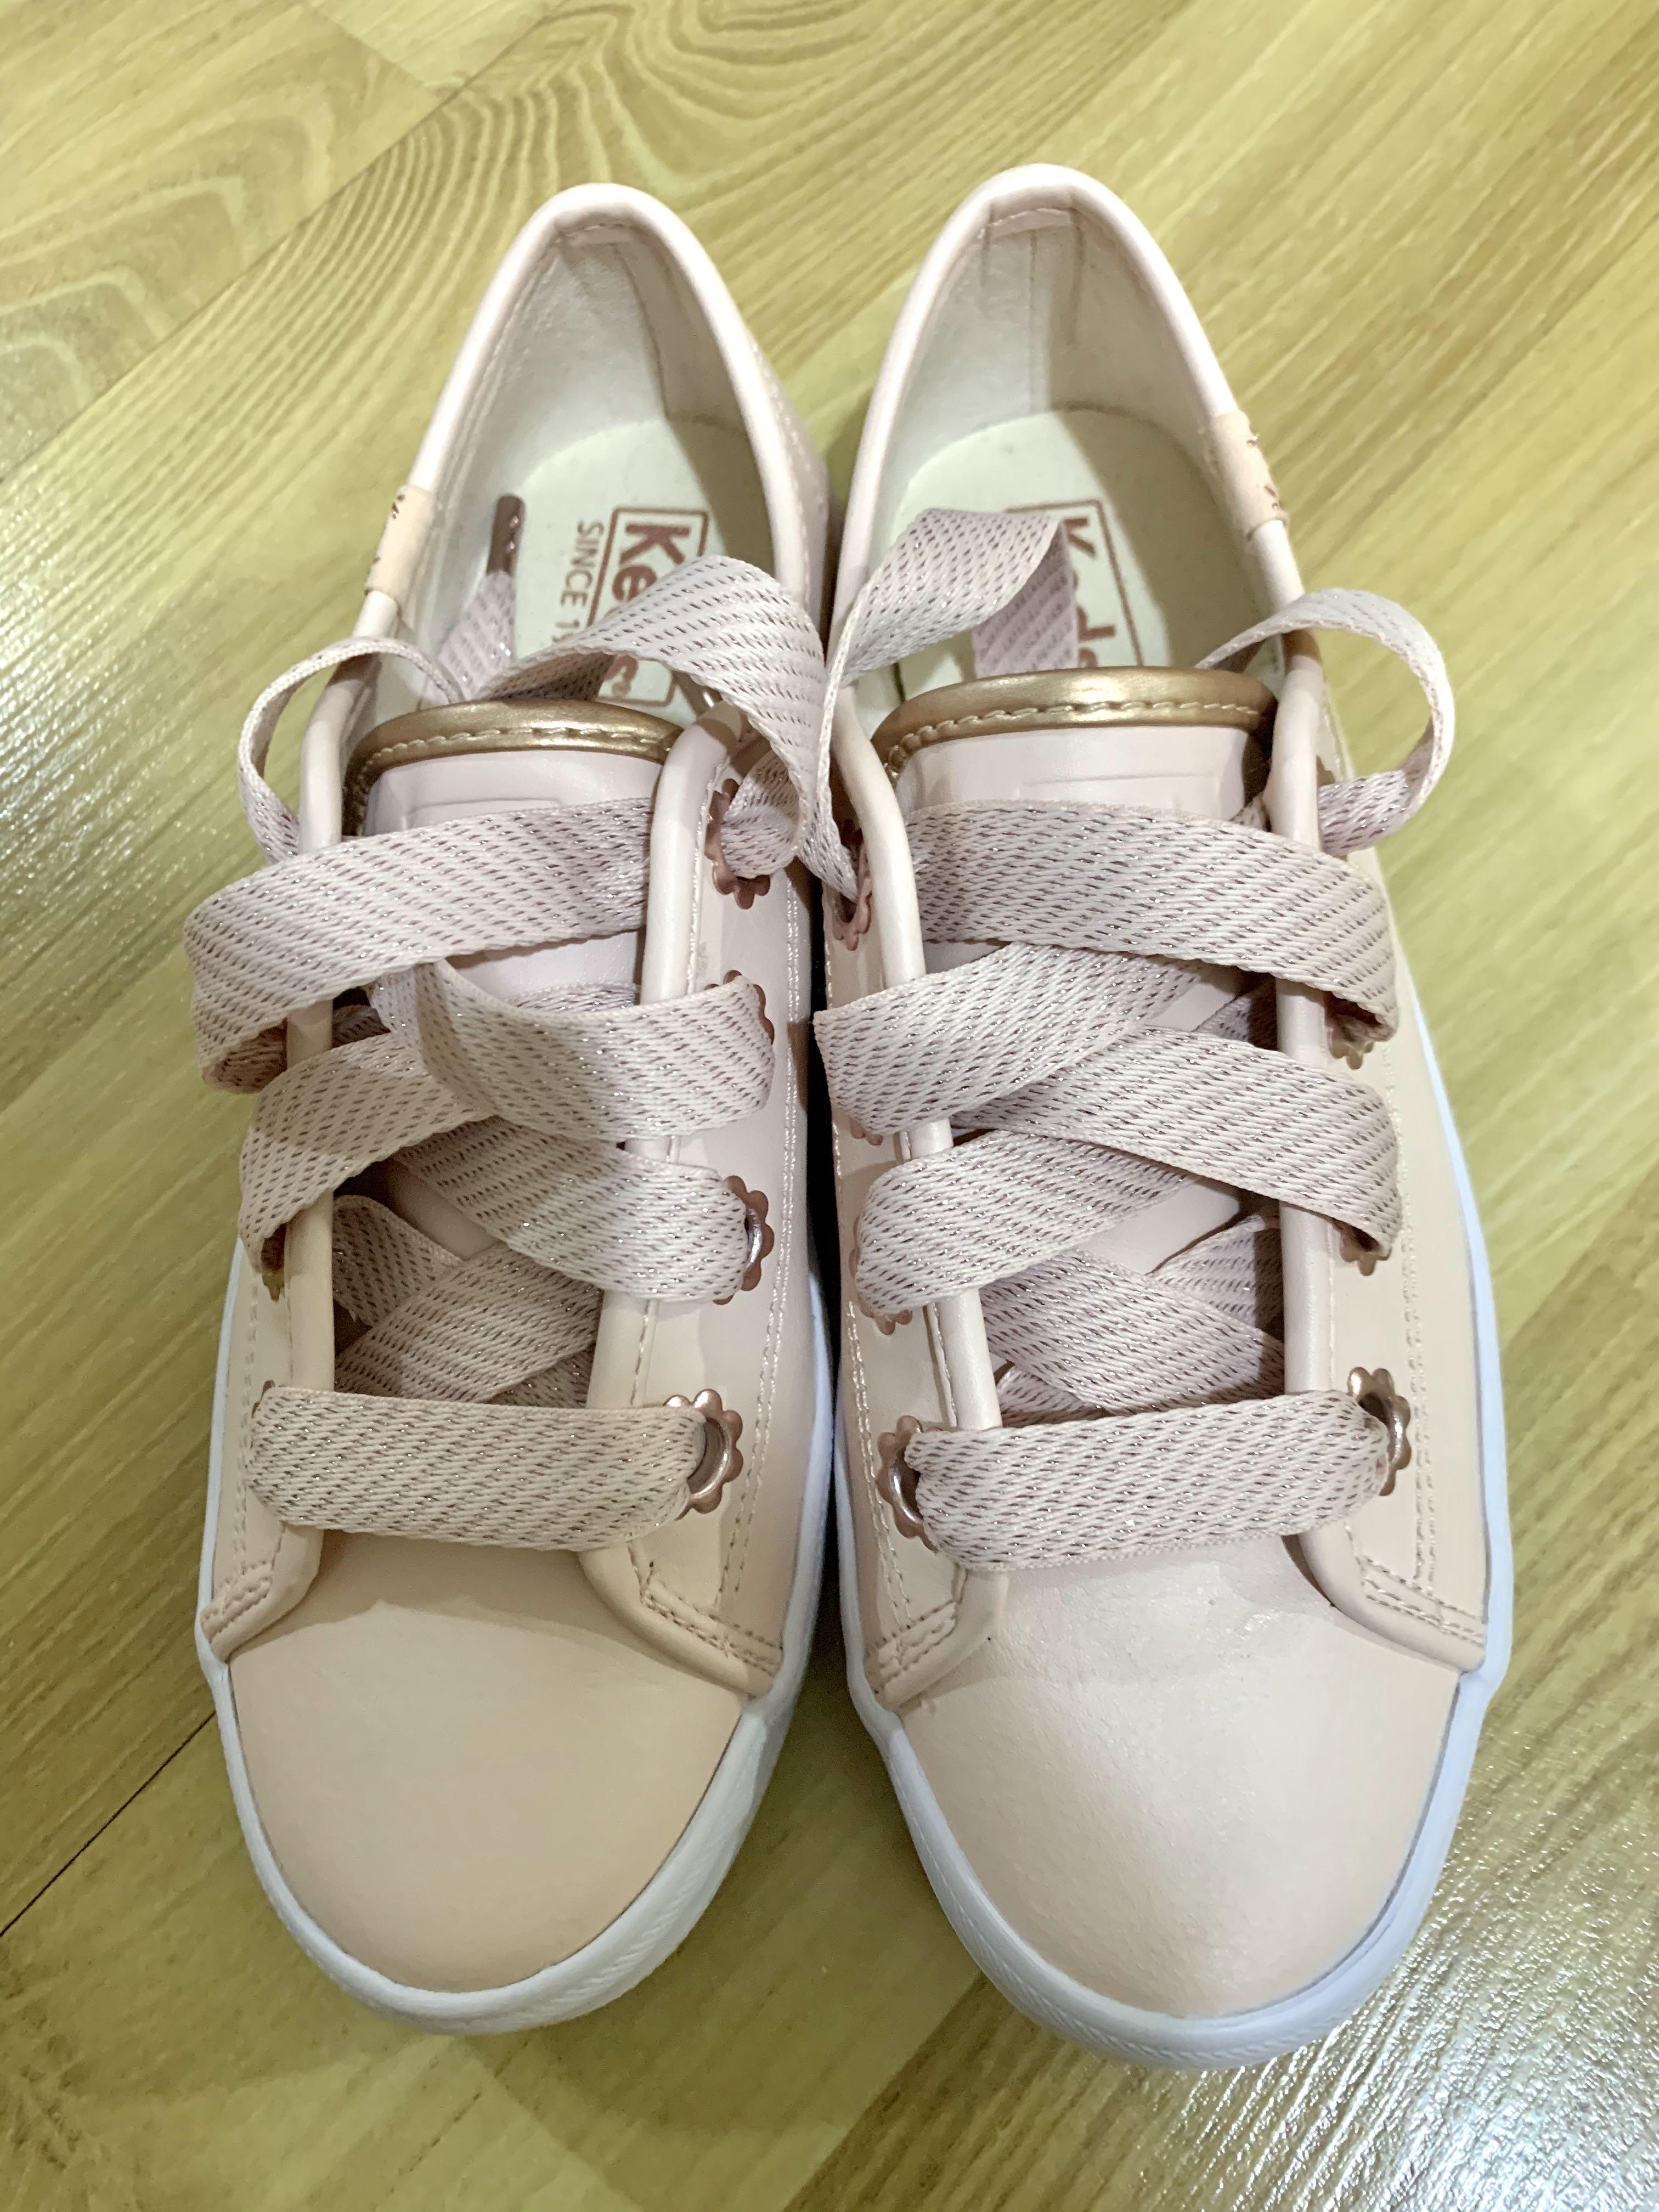 keds tan leather sneakers